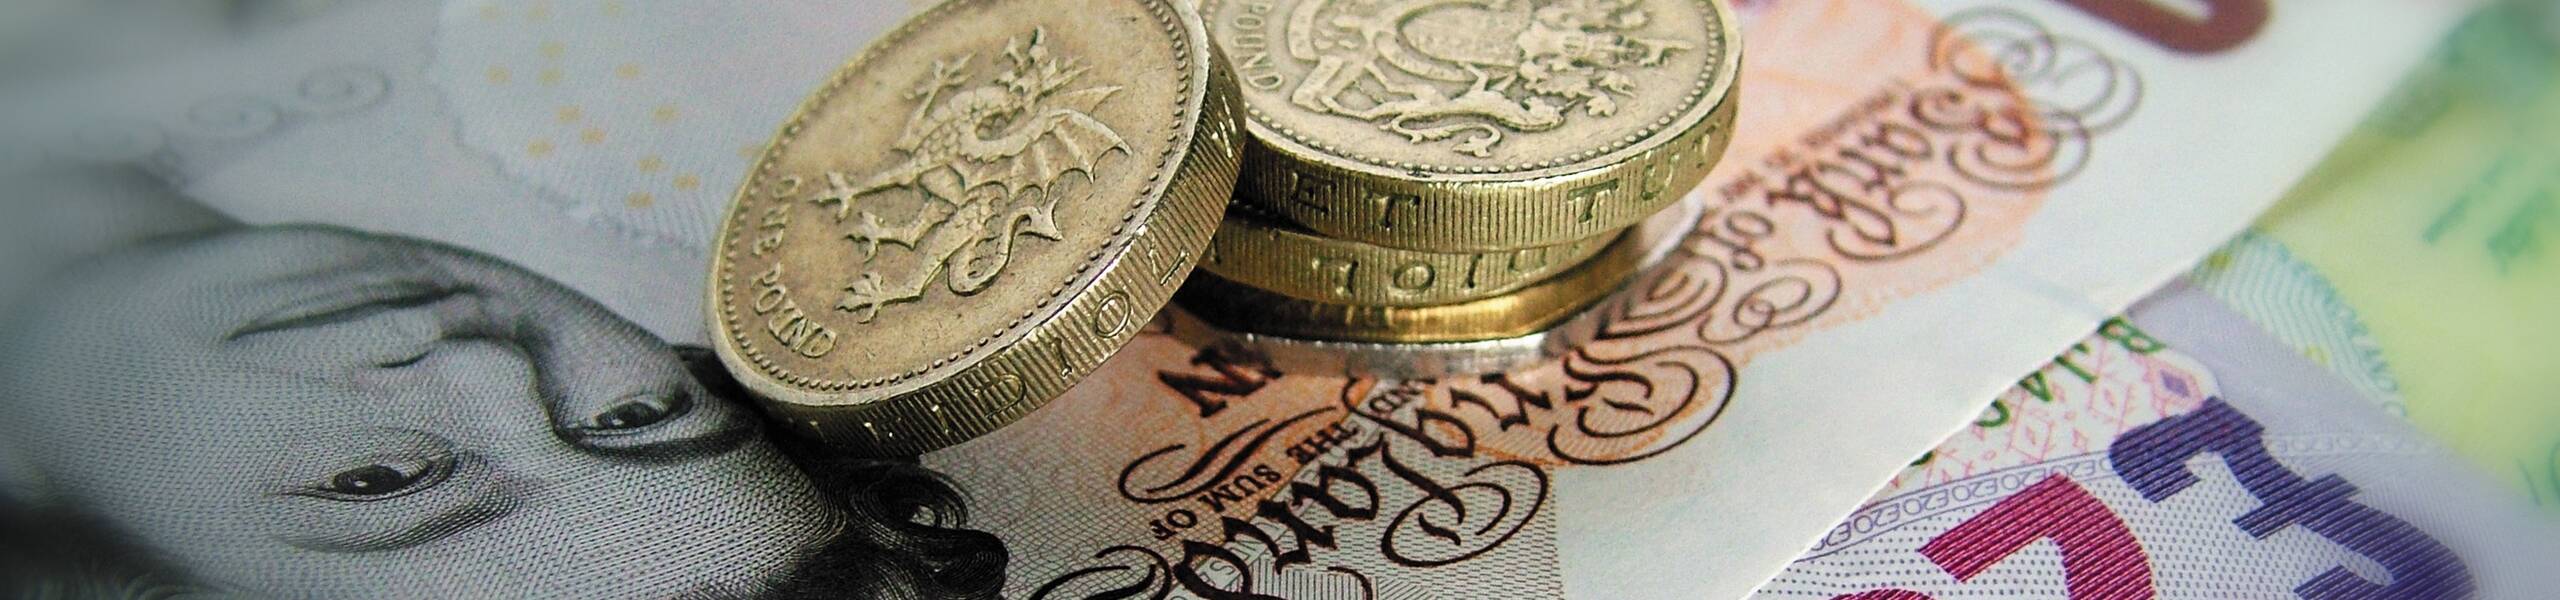 GBP/USD: price to continue declining